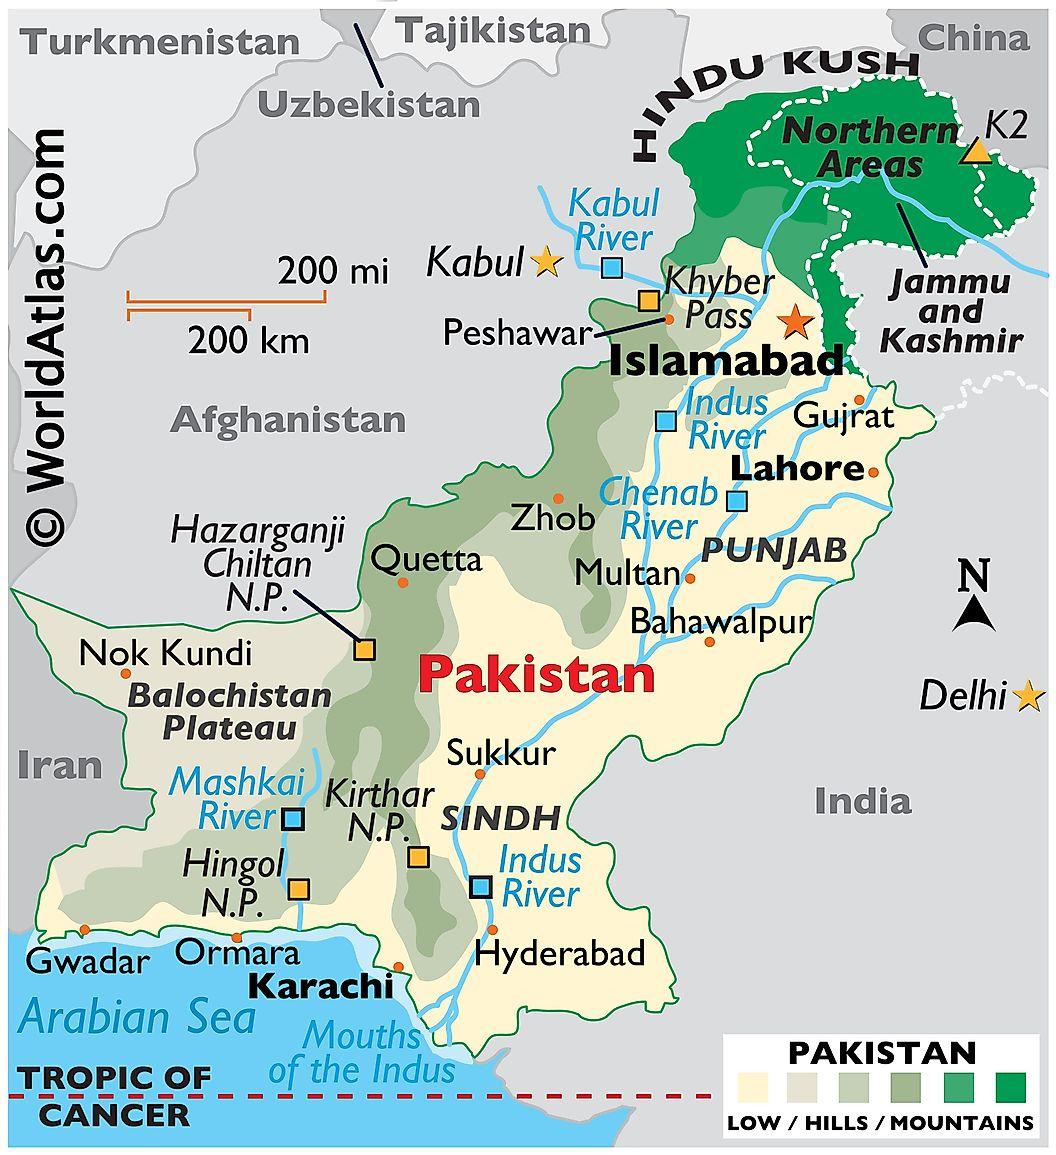 A map of Pakistan, showing the different regions of the country